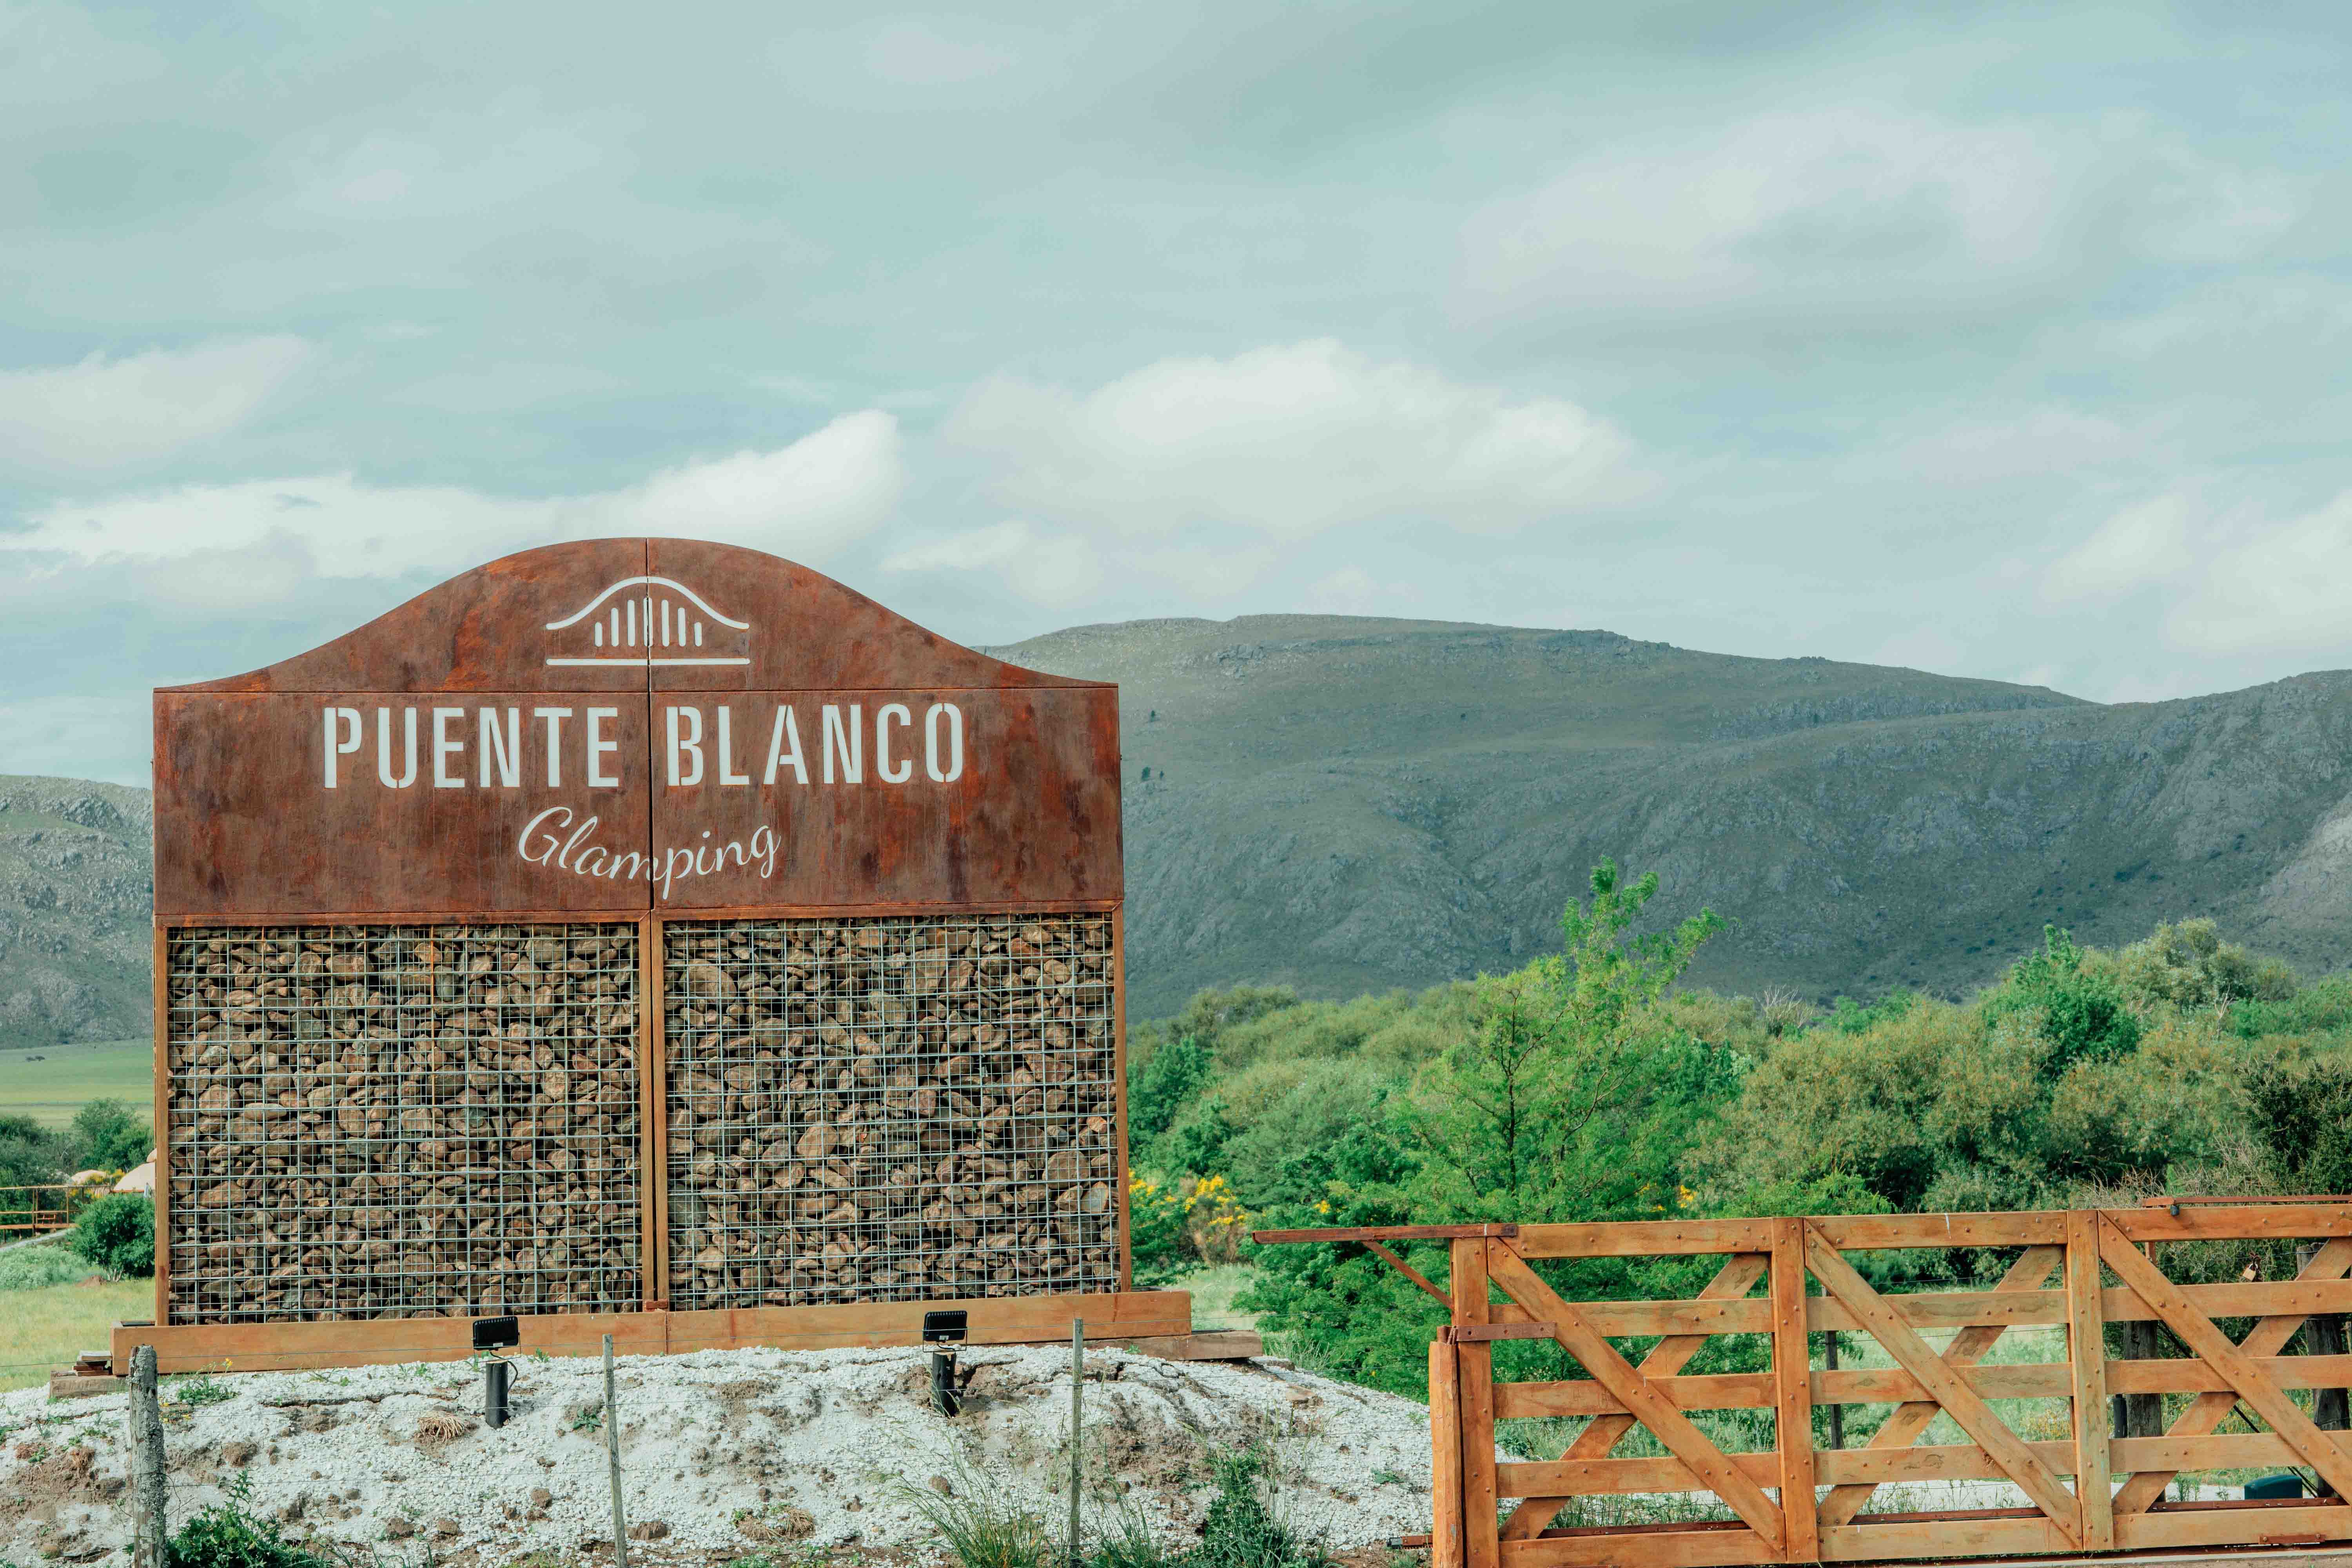 PUENTE BLANCO GLAMPING